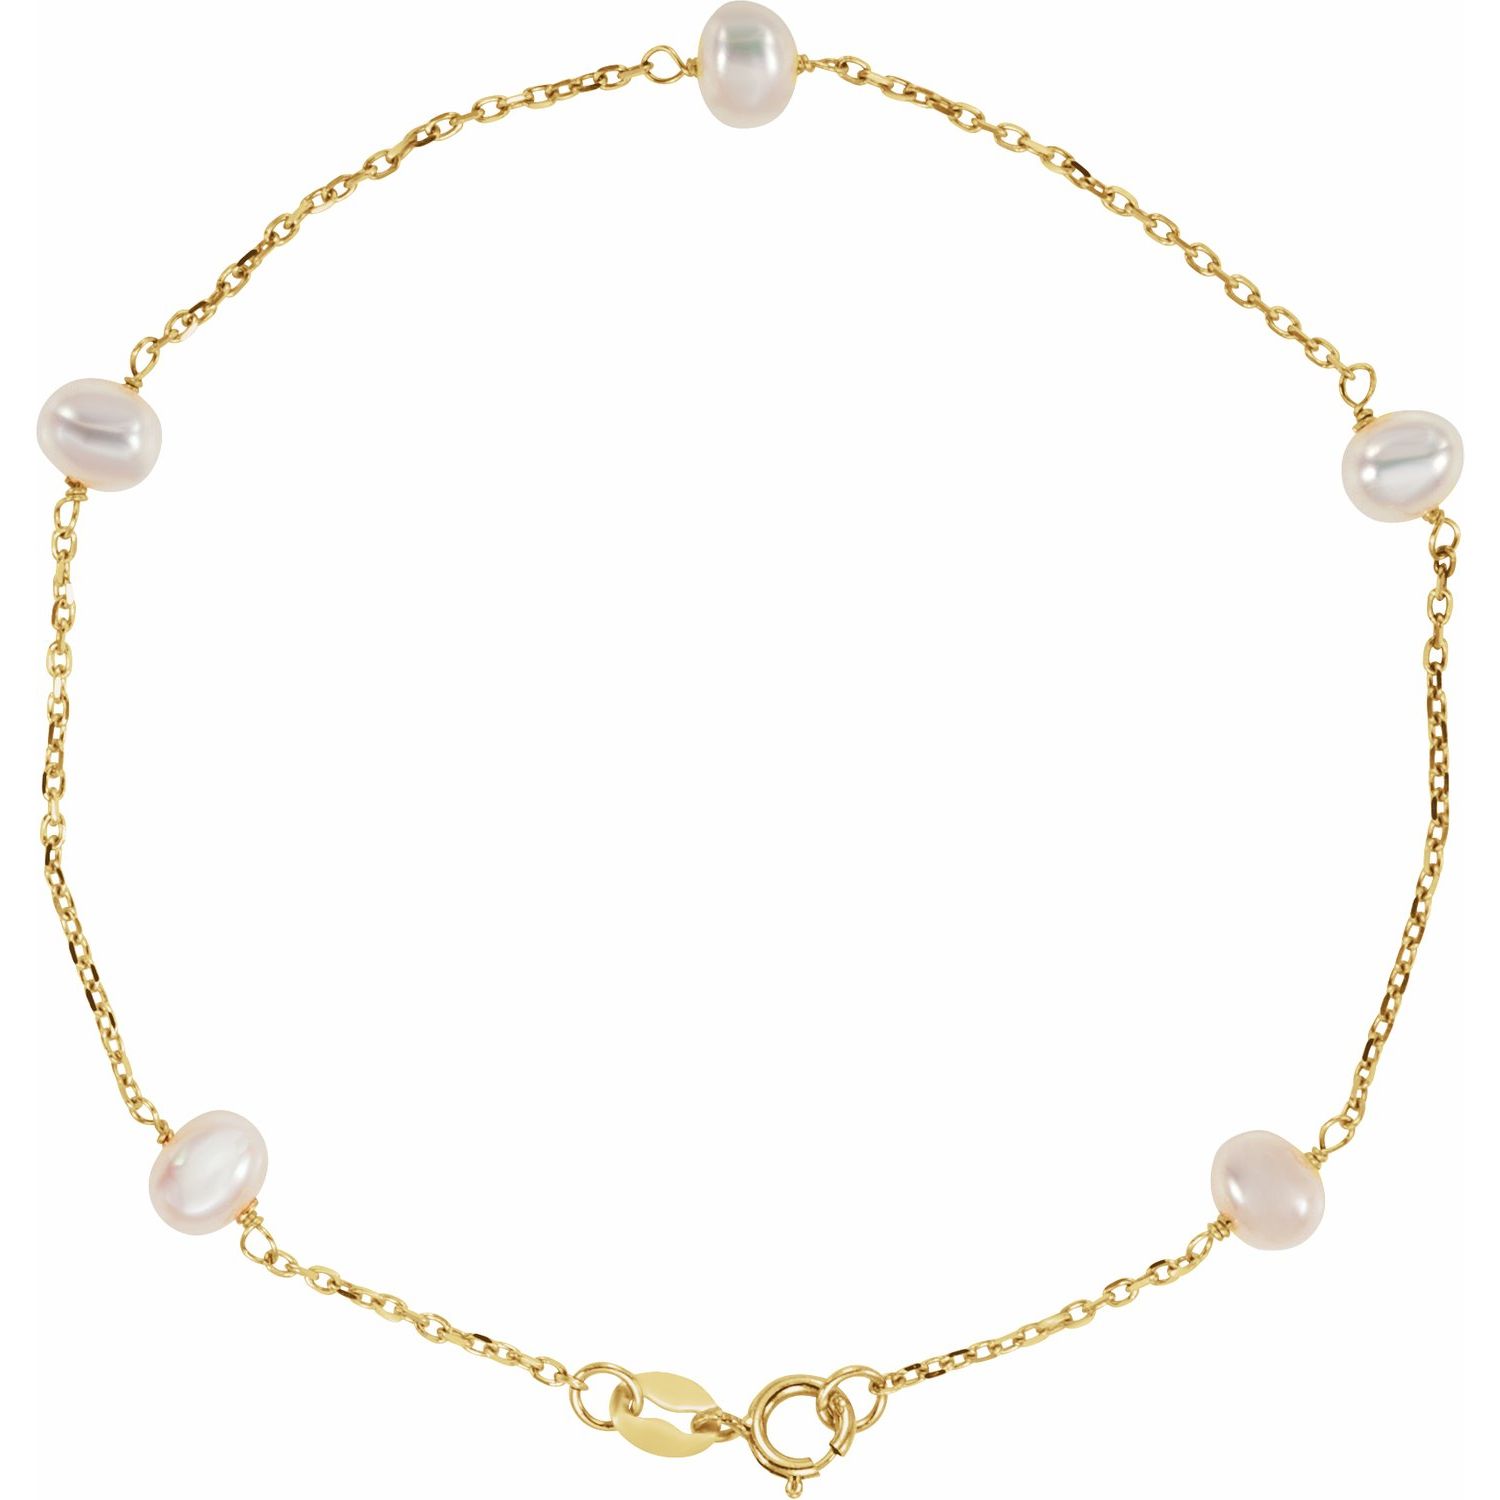 14K yellow gold round cultured pearl station bracelet